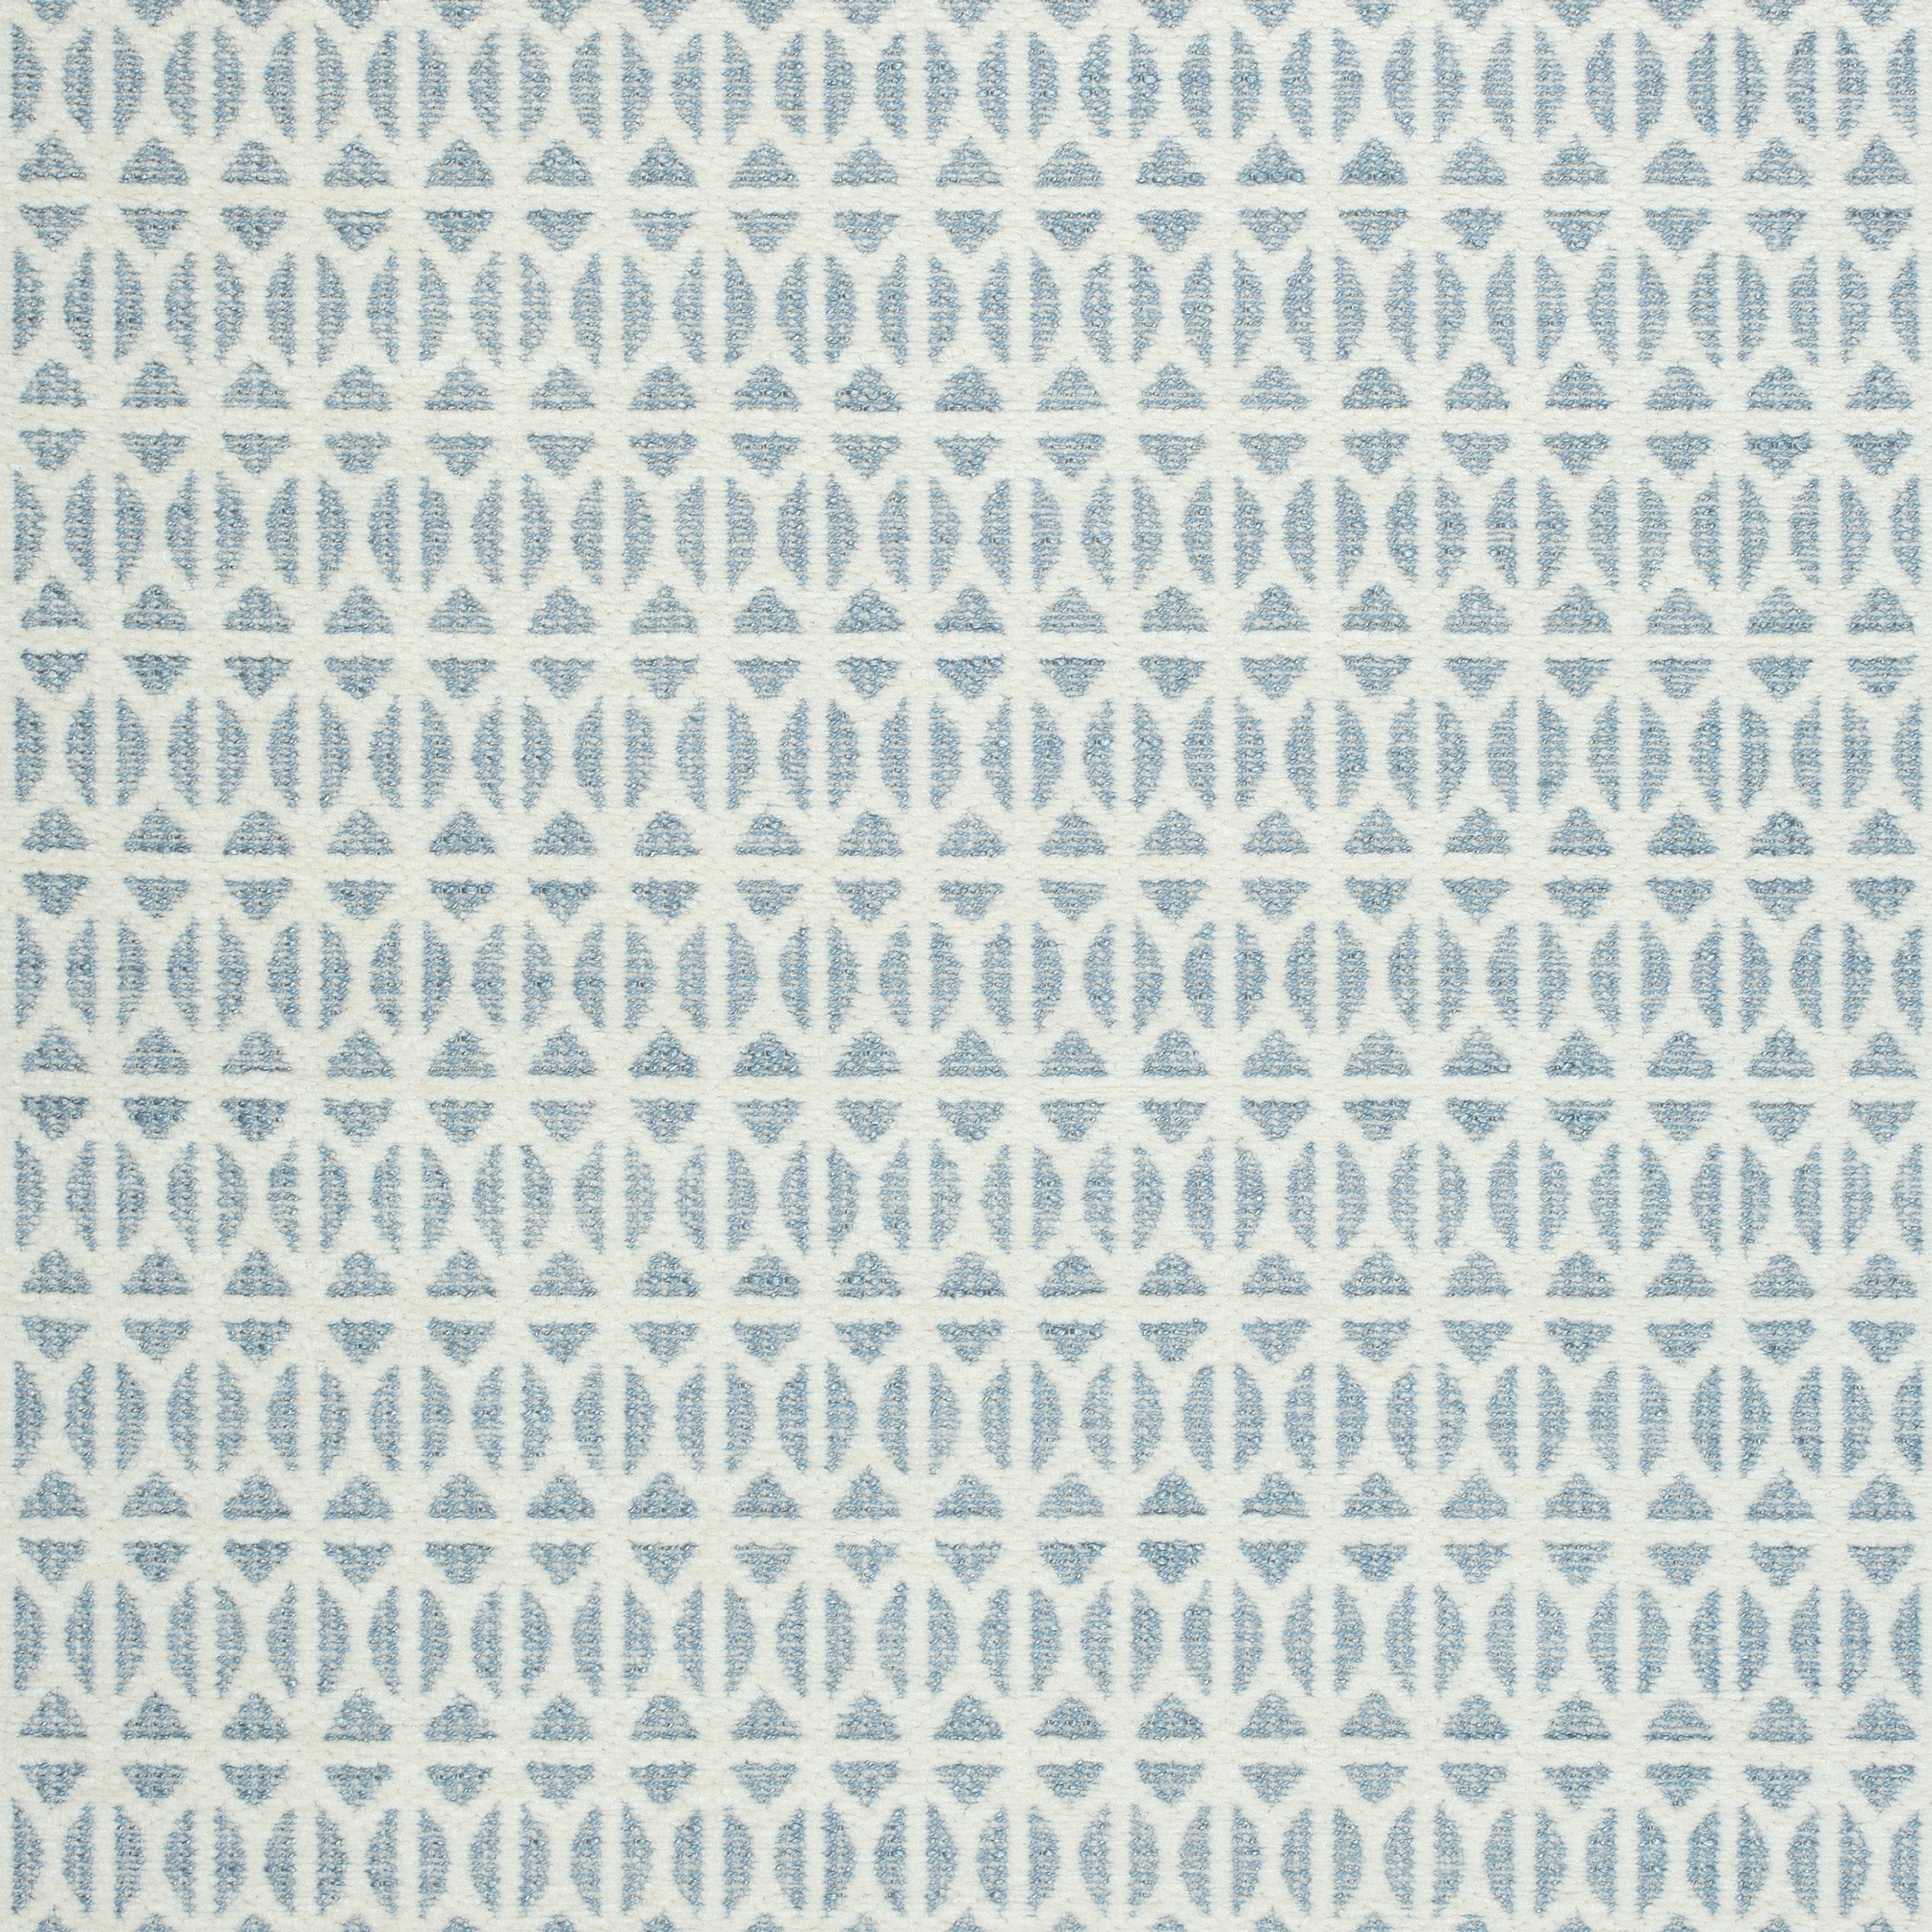 Quinlan fabric in sky color - pattern number W789108 - by Thibaut in the Reverie collection